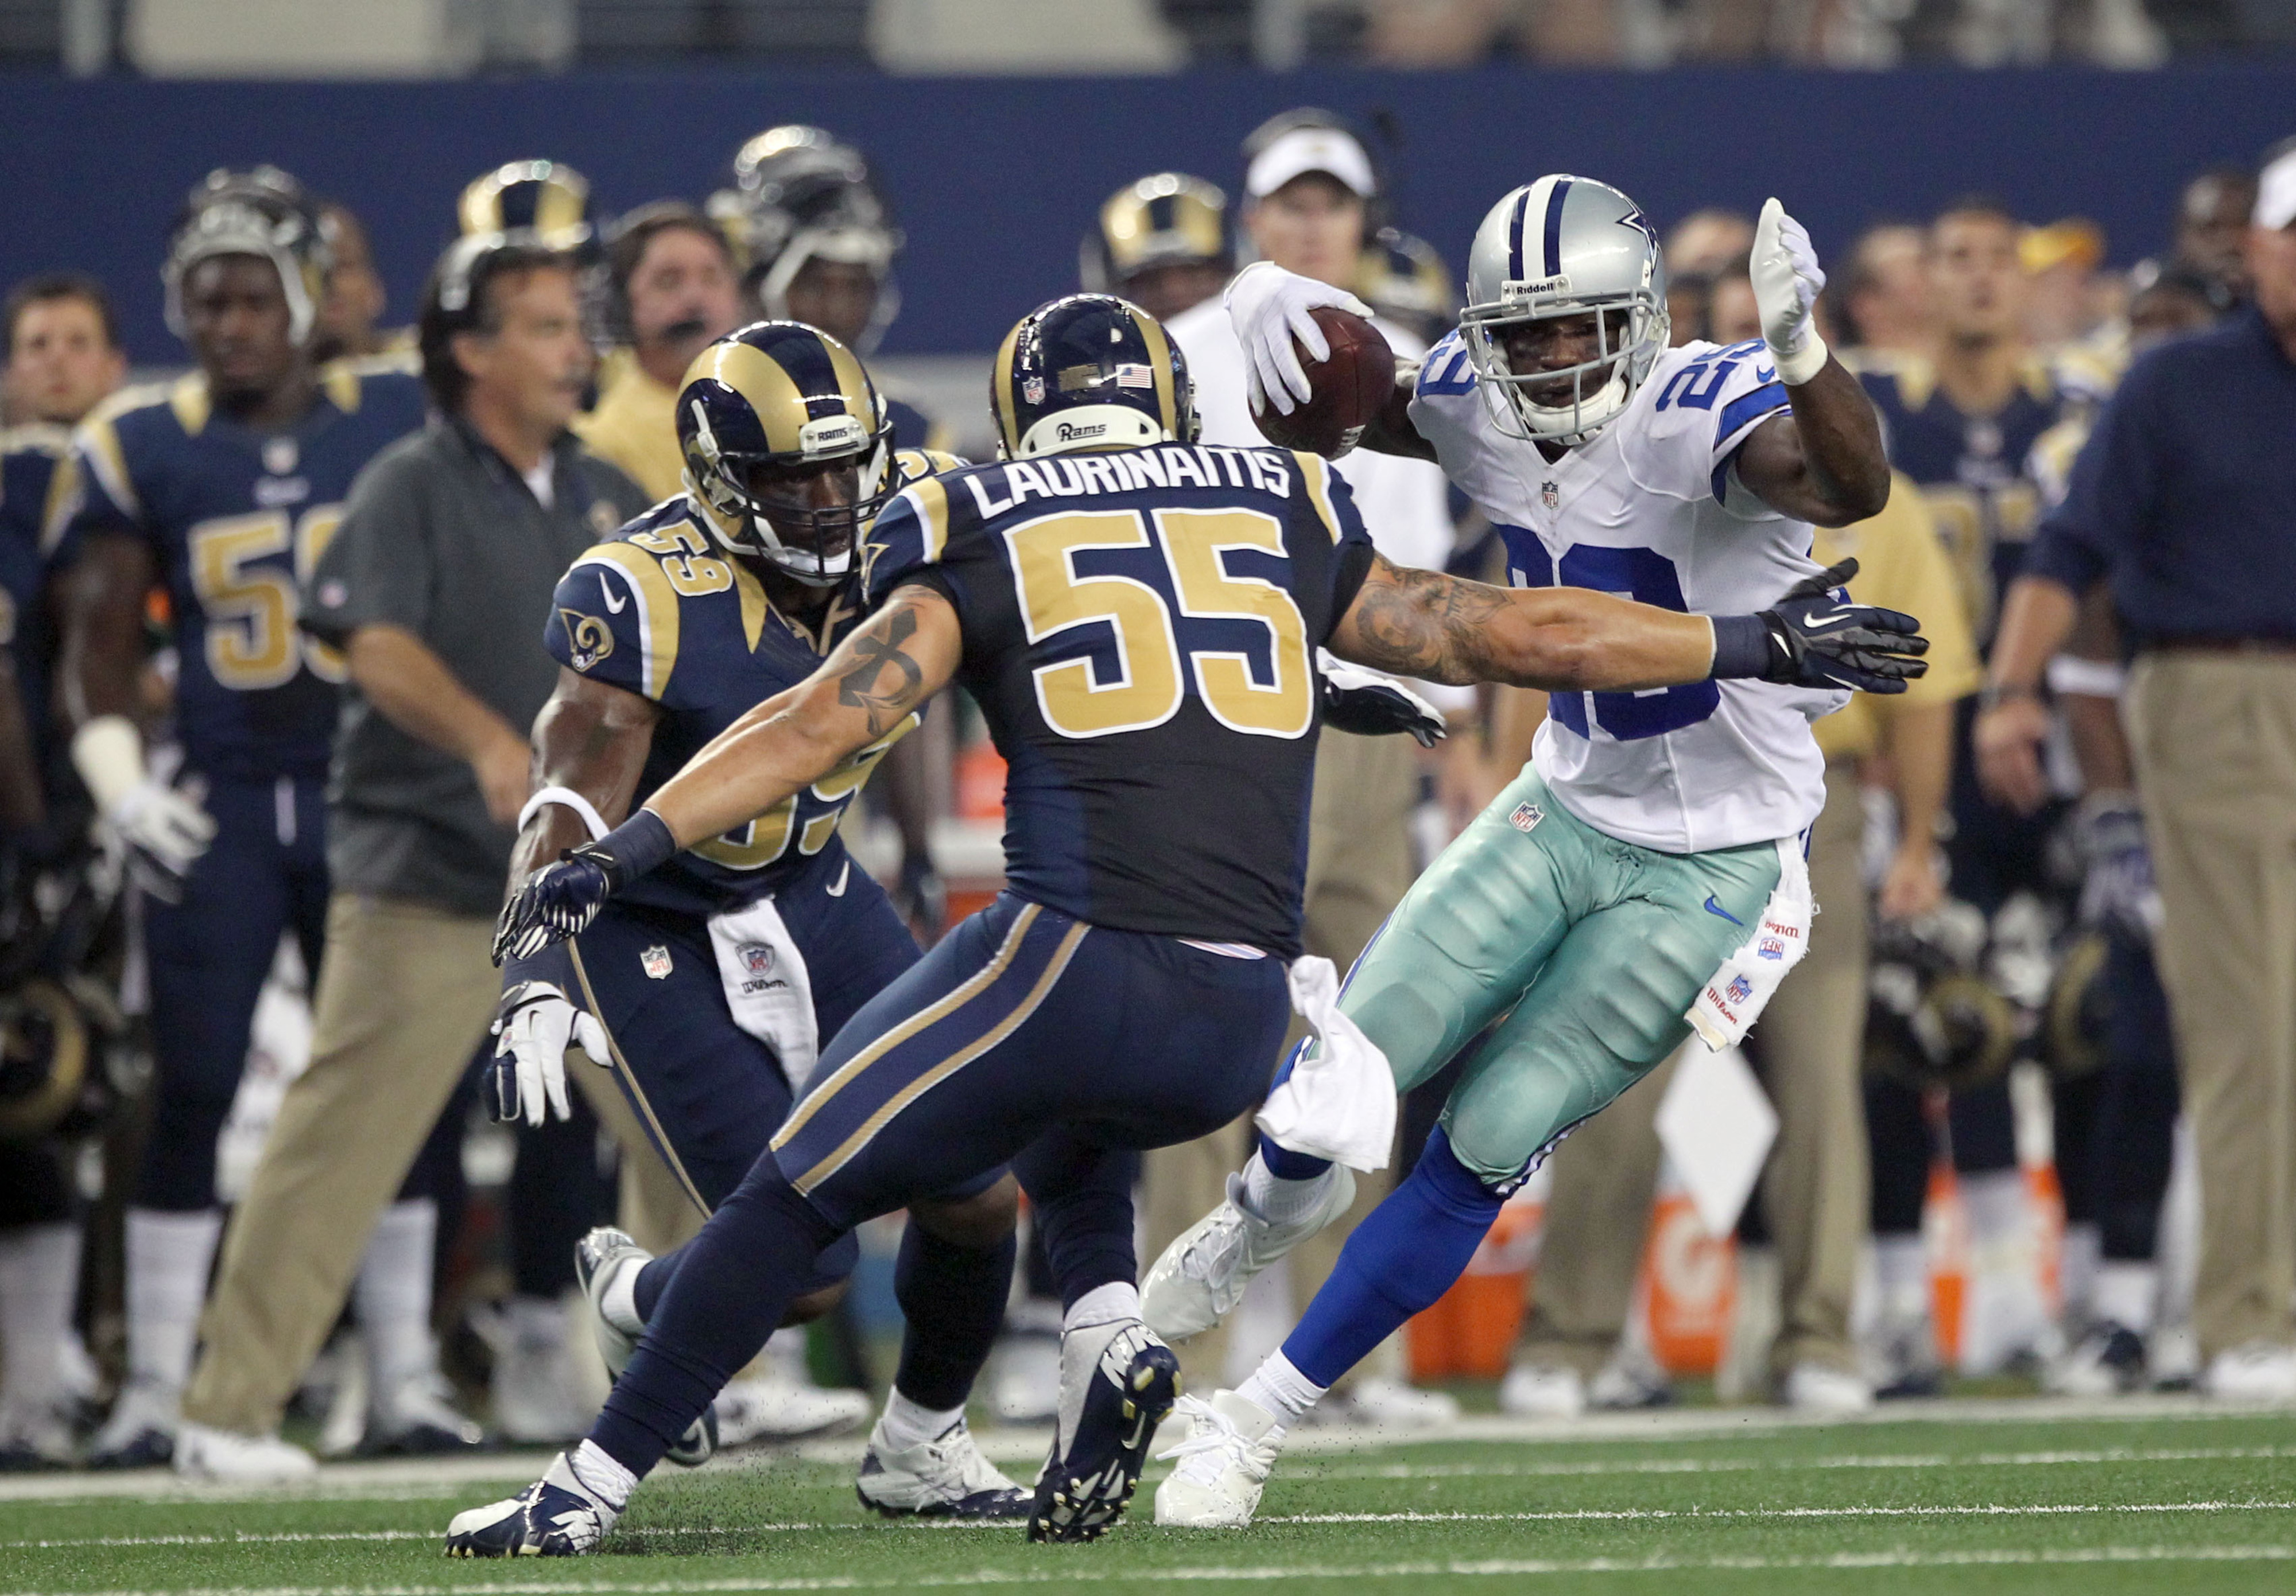 Aug 25, 2012; Arlington, TX, USA; Dallas Cowboys running back DeMarco Murray (29) runs with the ball against St Louis Rams linebacker James Laurinaitis (55) in the first quarter at Cowboys Stadium. Mandatory Credit: Matthew Emmons-US PRESSWIRE